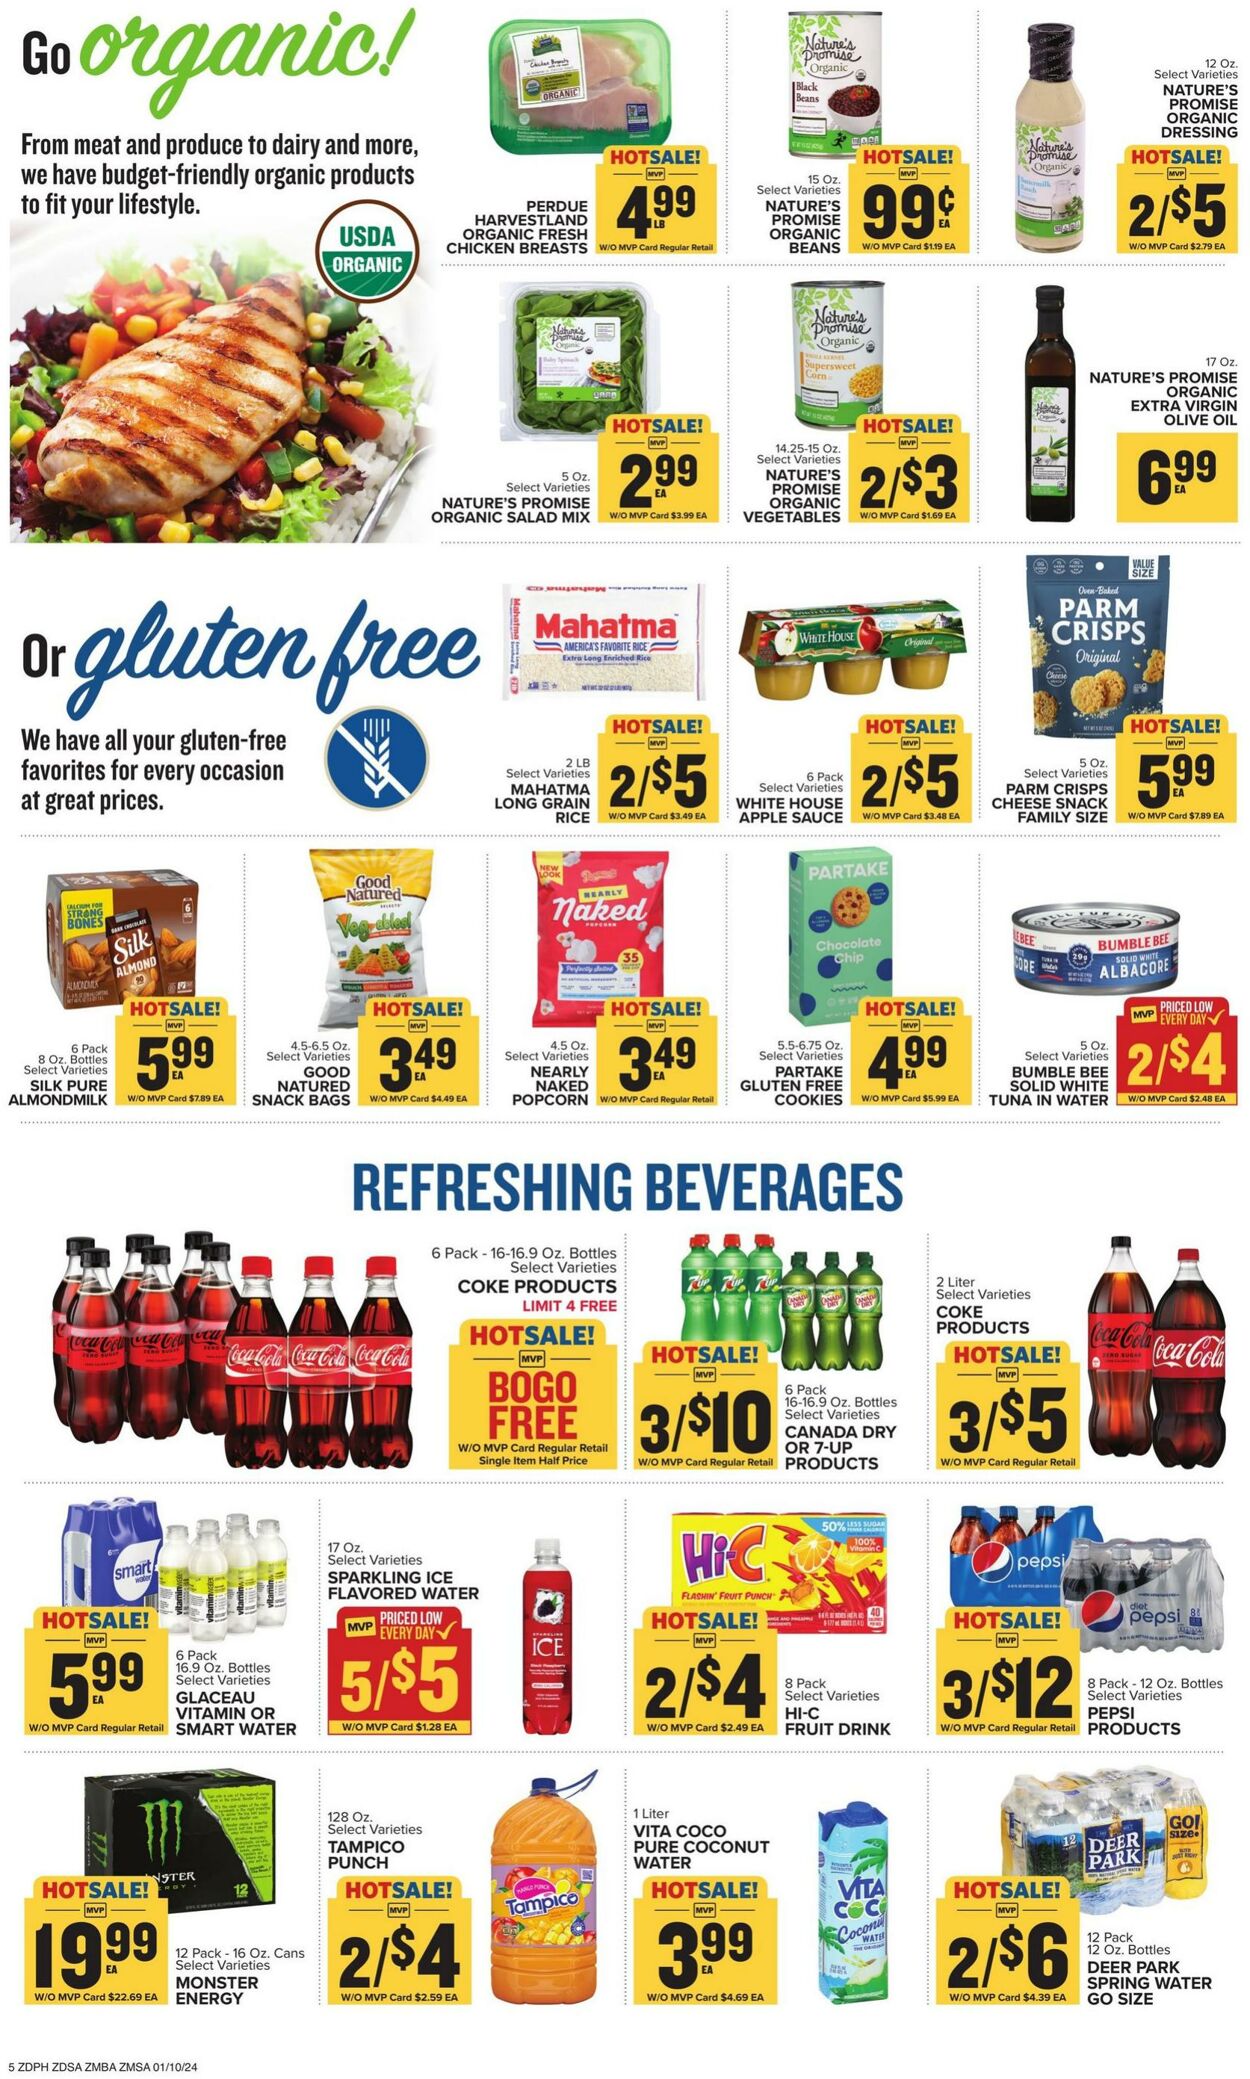 Food Lion Ad from 01/10/2024